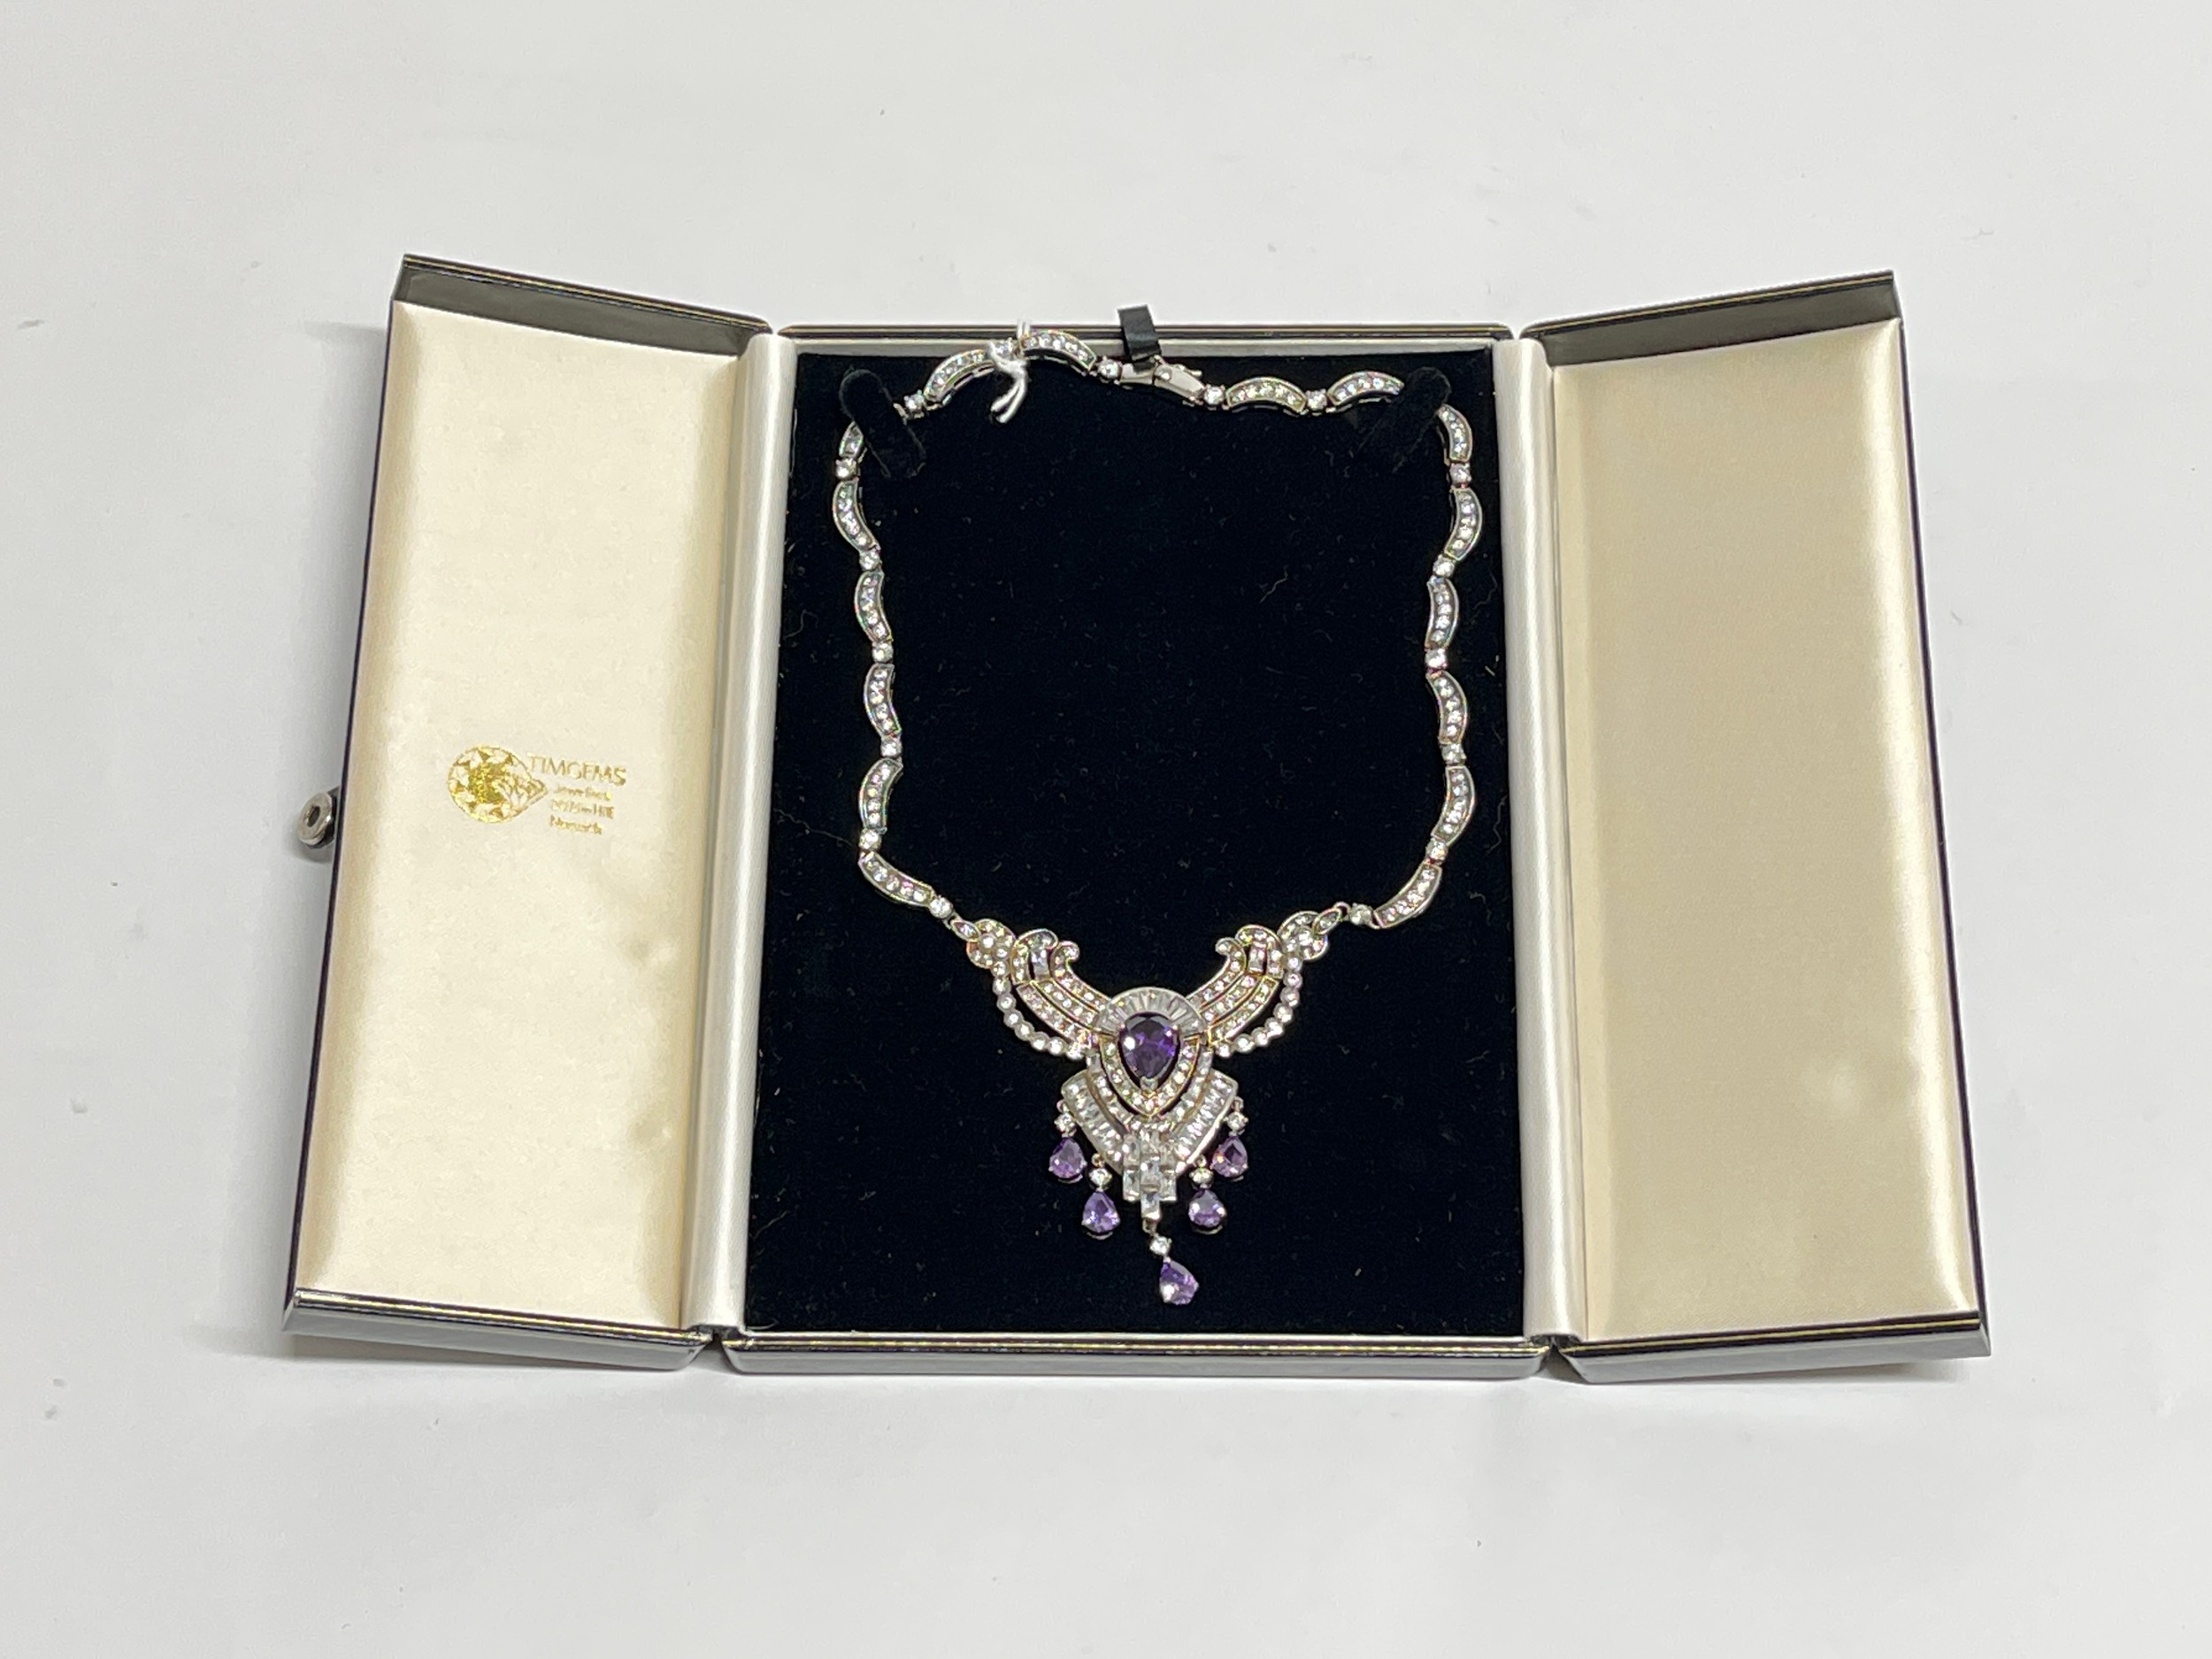 An Art Deco style statement necklace, multi set with brilliant purple and white stones, stamped 925